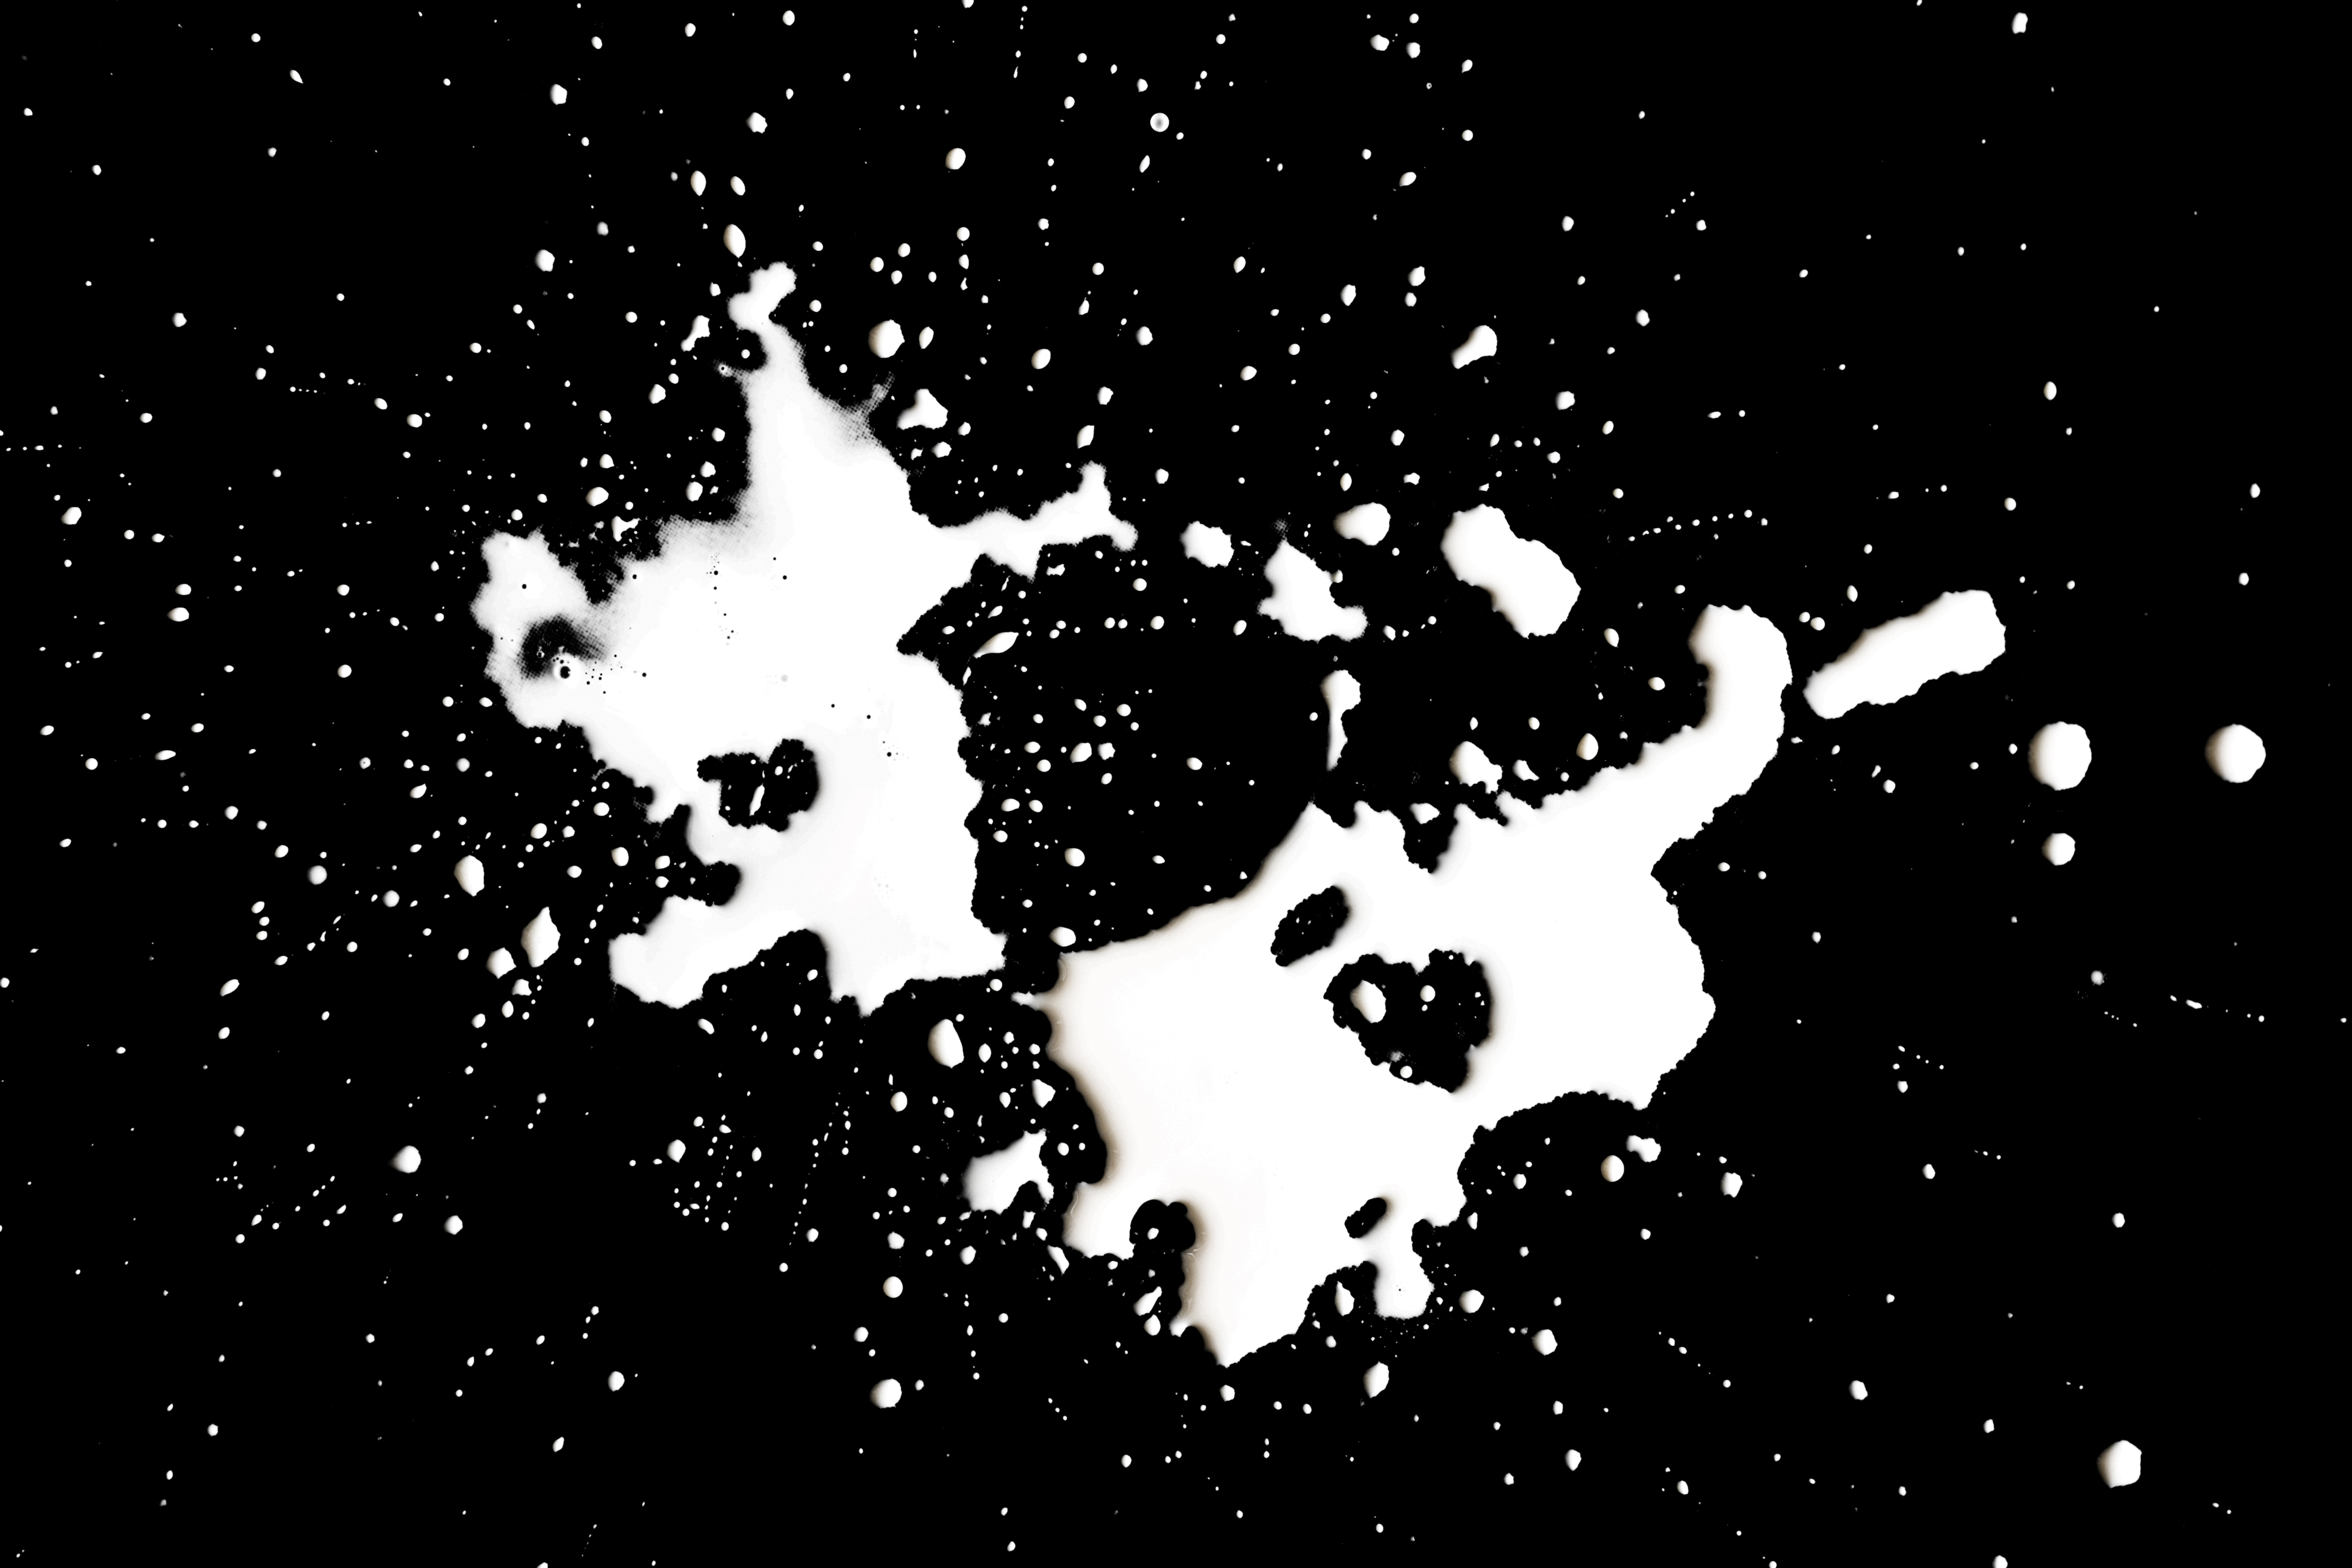 Free HD spots, black, abstract, drops, white, spray, stains, bw, chb